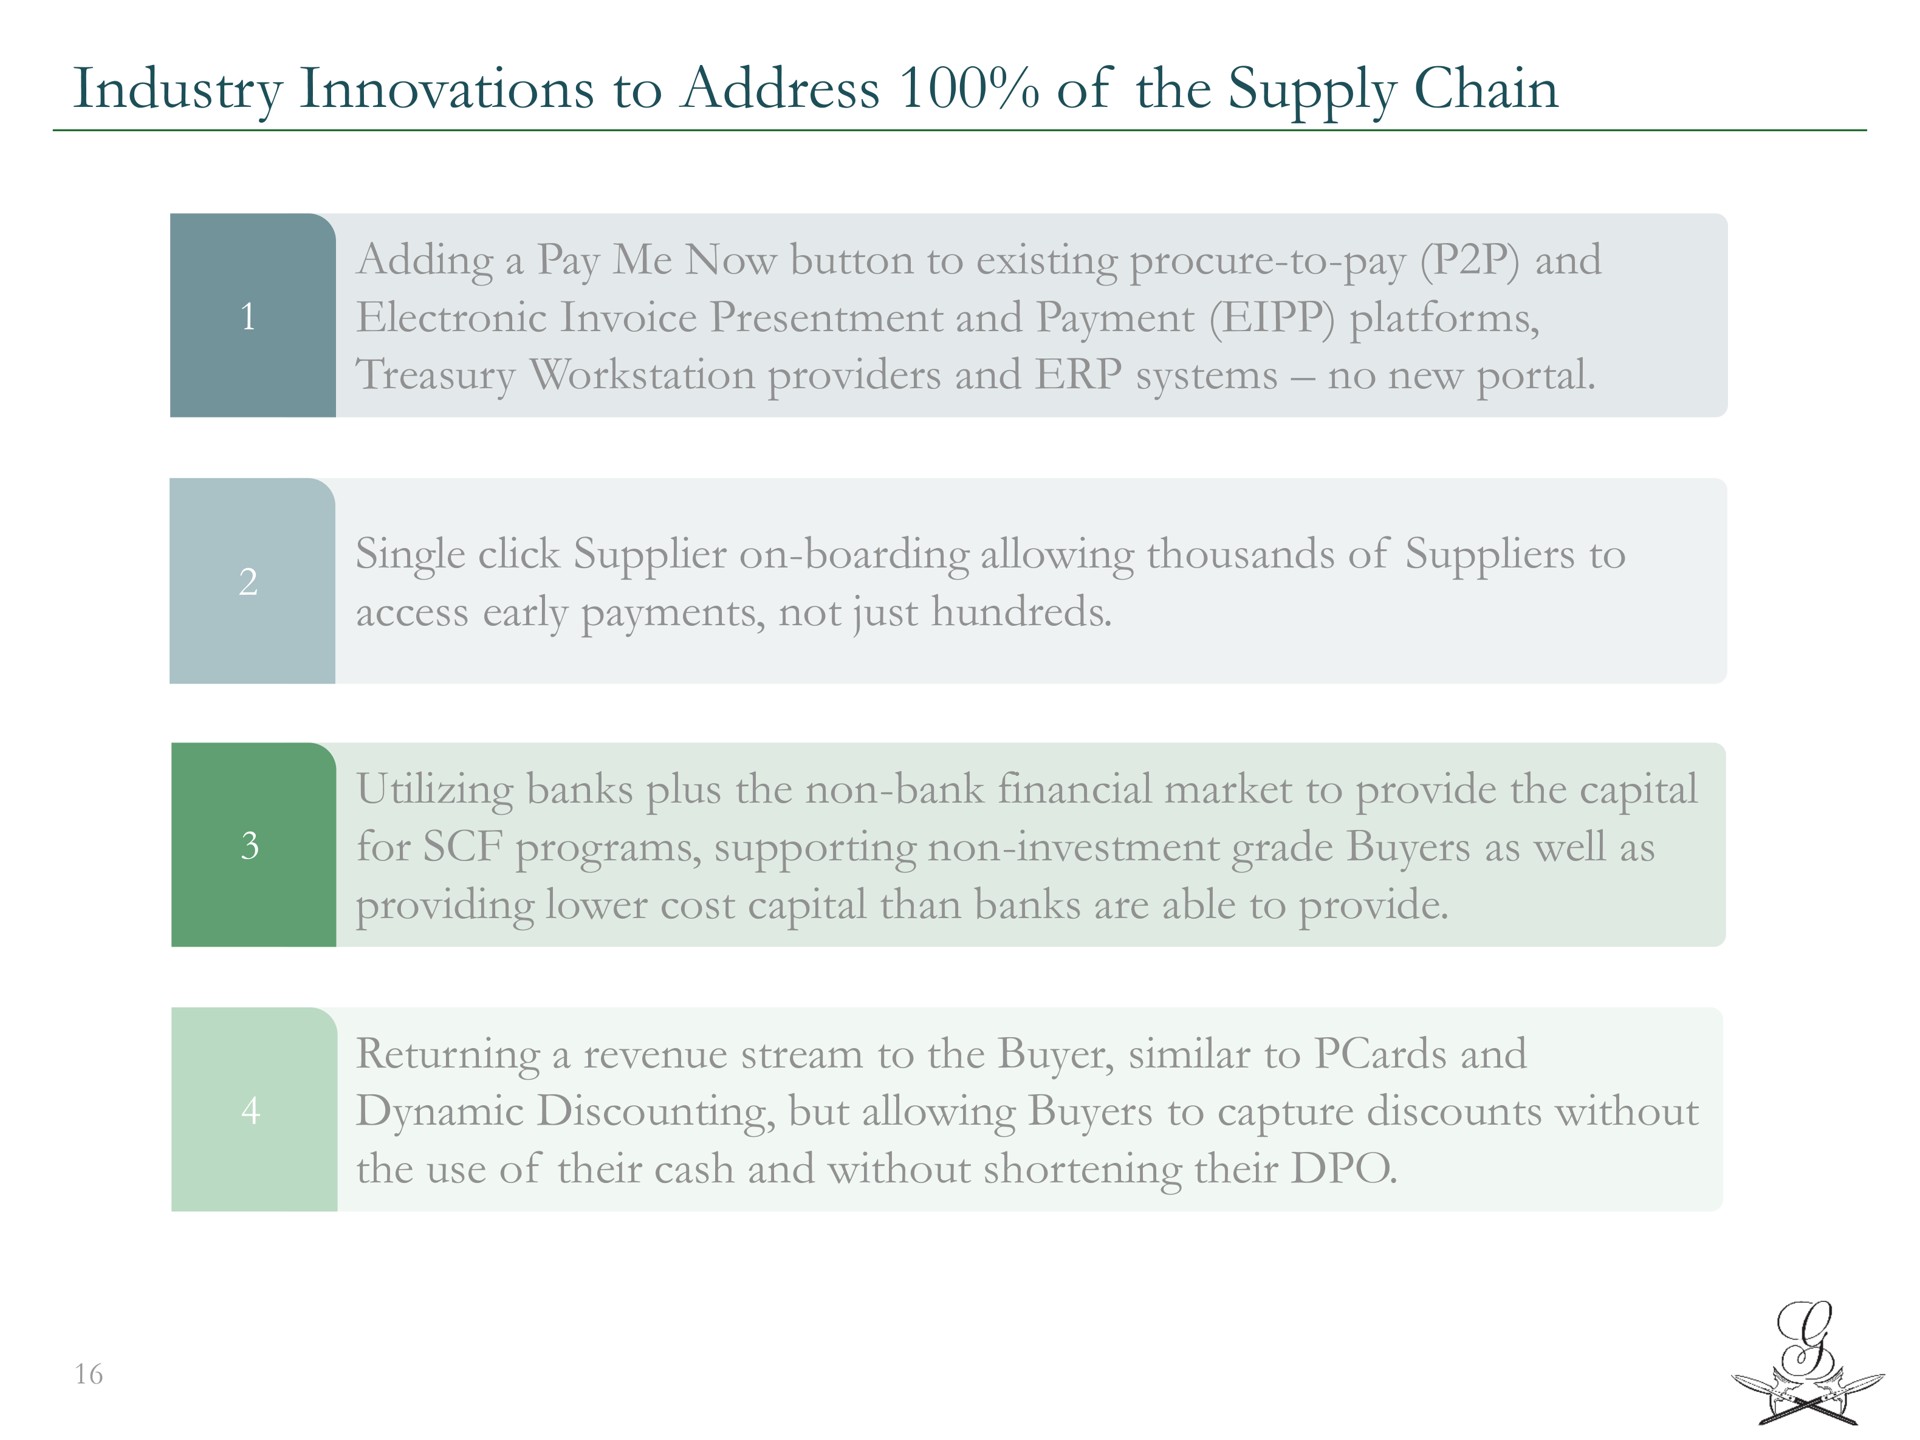 industry innovations to address of the supply chain adding a pay me now button to existing procure to pay and electronic invoice presentment and payment platforms treasury providers and systems no new portal single click supplier on boarding allowing thousands of suppliers to access early payments not just hundreds utilizing banks plus the non bank financial market to provide the capital for programs supporting non investment grade buyers as well as providing lower cost capital than banks are able to provide returning a revenue stream to the buyer similar to and dynamic discounting but allowing buyers to capture discounts without the use of their cash and without shortening their | Greensill Capital